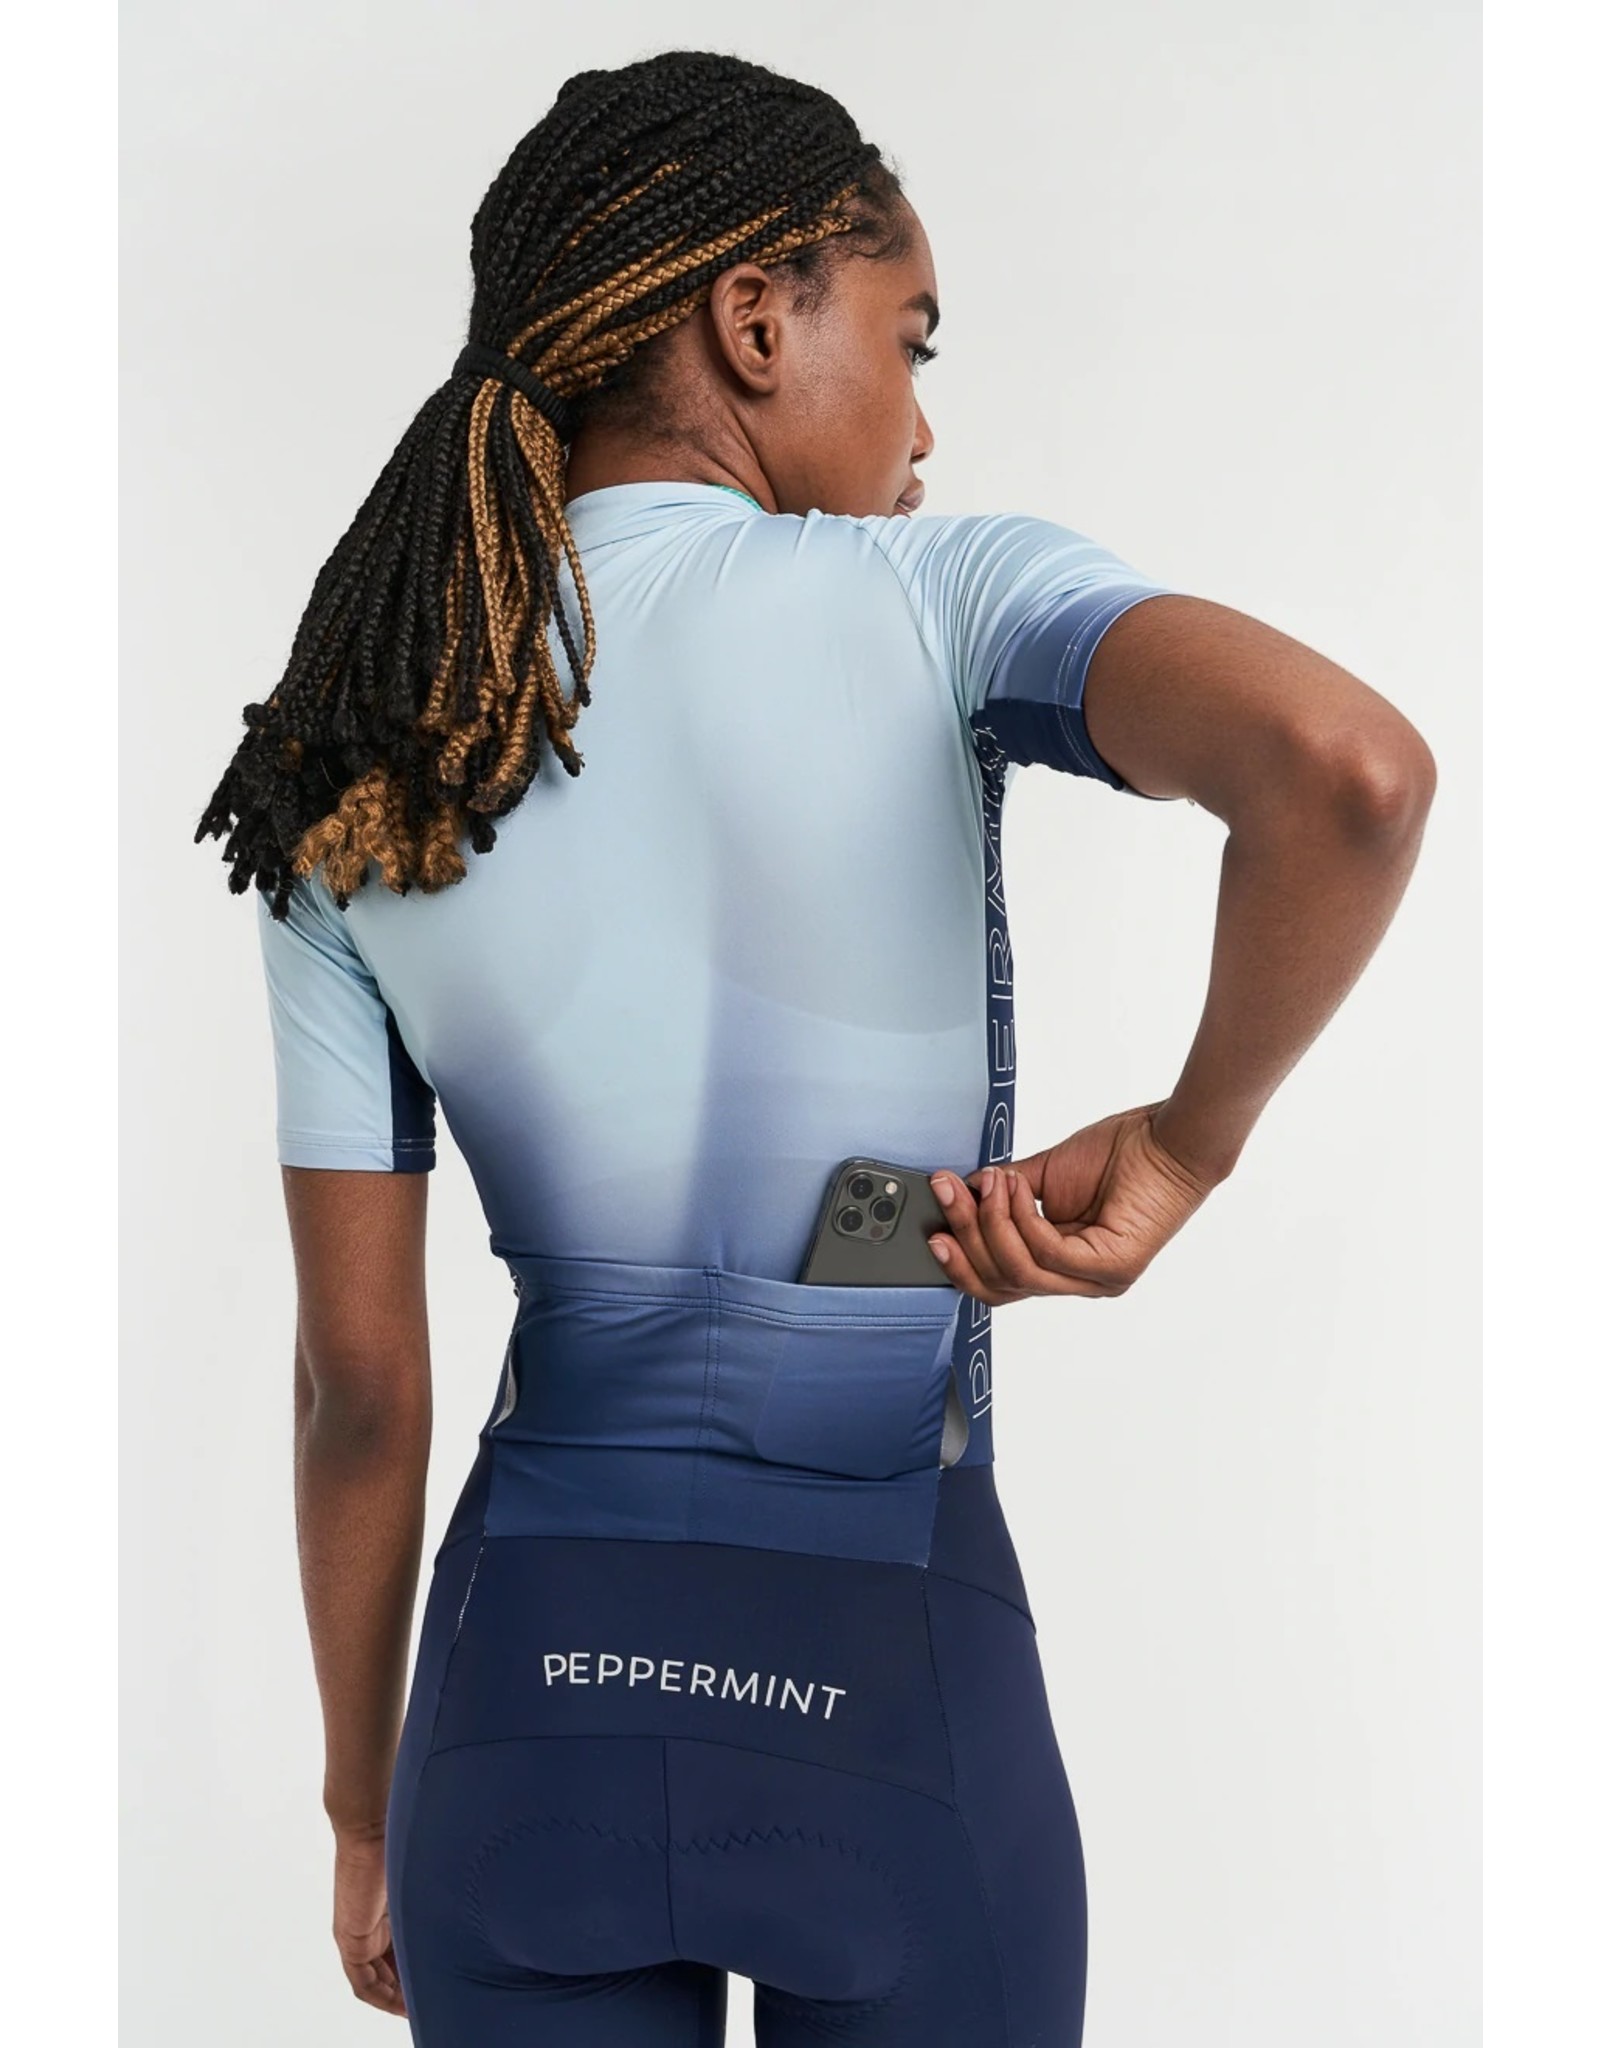 Peppermint '22, PEPPERMINT CYCLING, Signature Skinsuit SS, Courage Light Blue